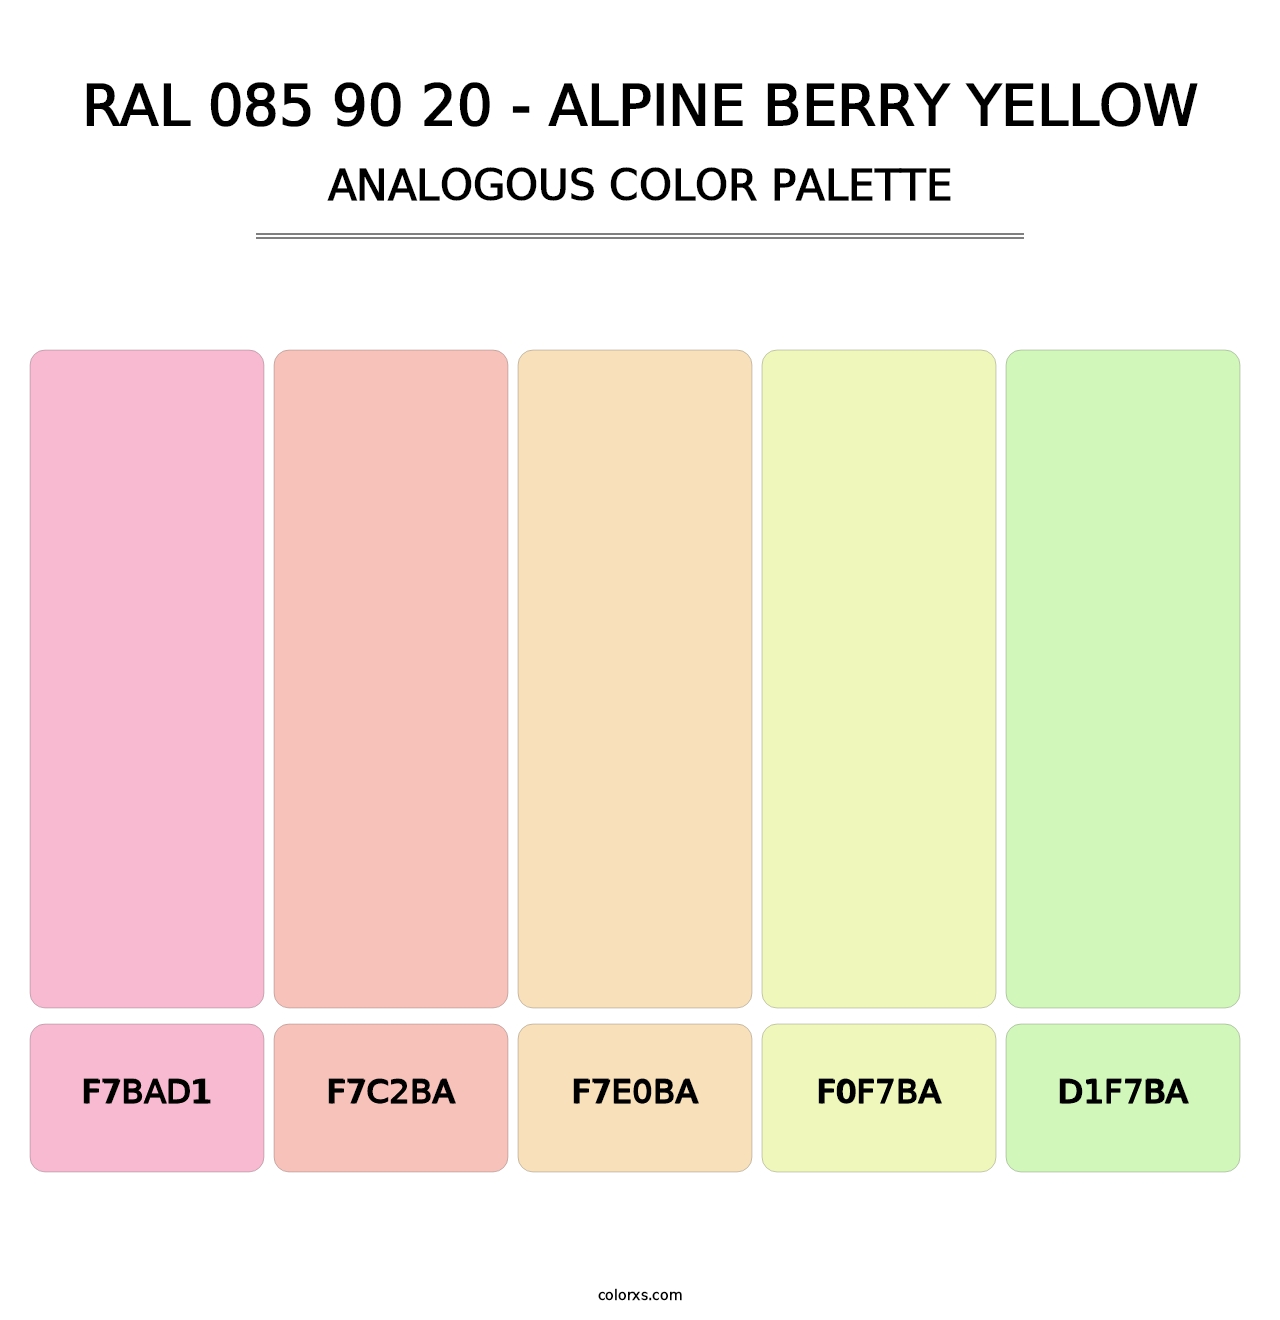 RAL 085 90 20 - Alpine Berry Yellow - Analogous Color Palette